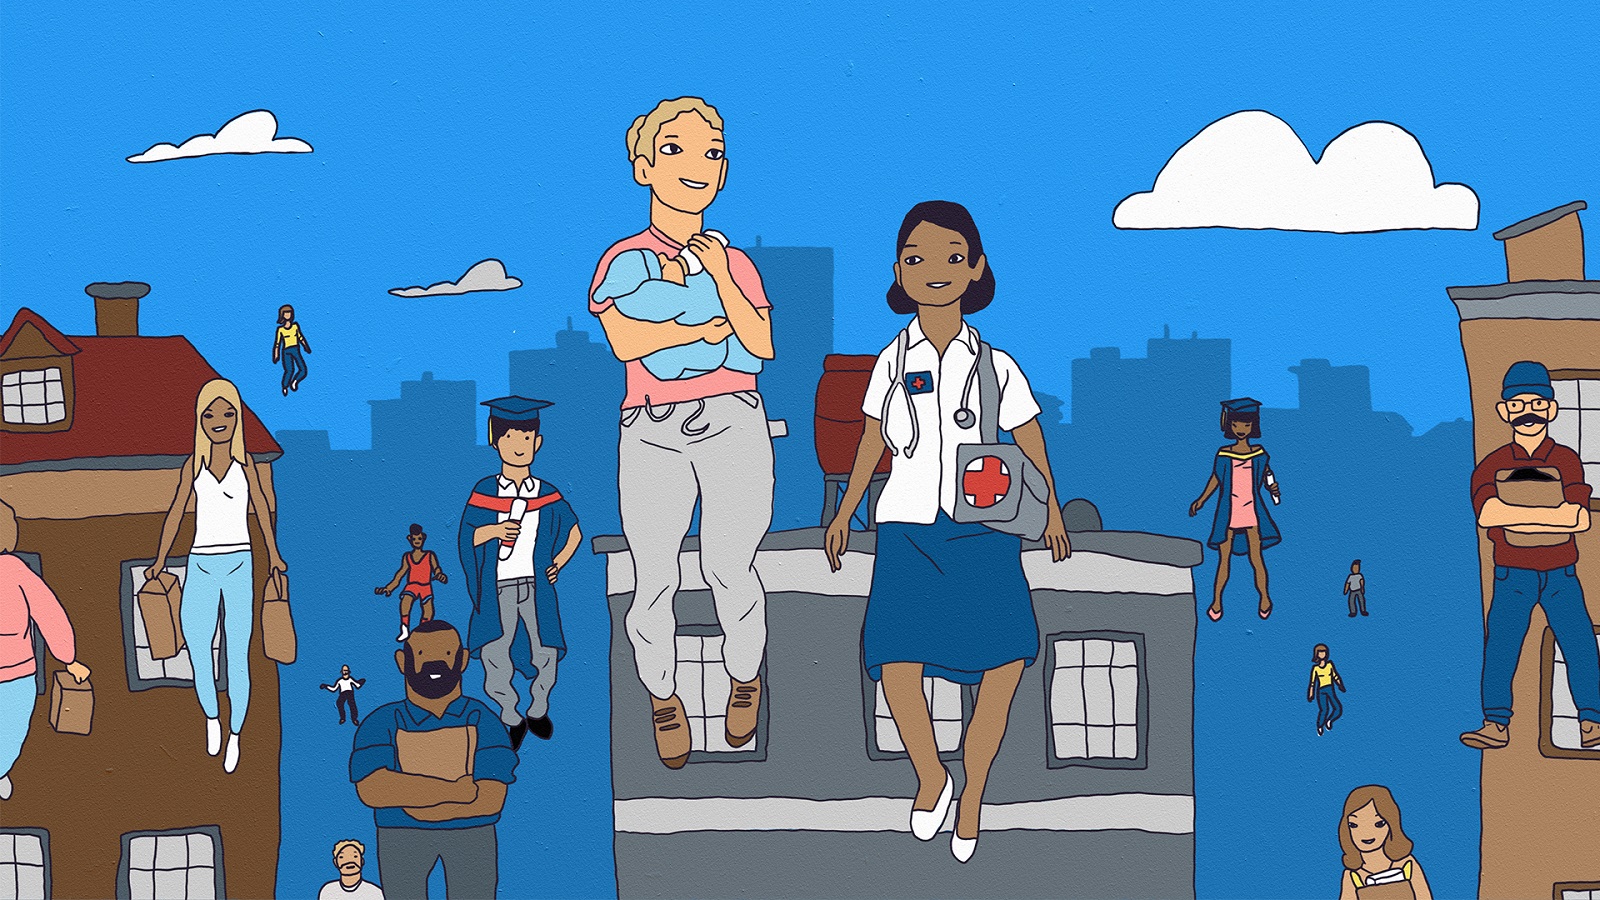 Goodwill Continues Its Cycle of Good via Charming Animations